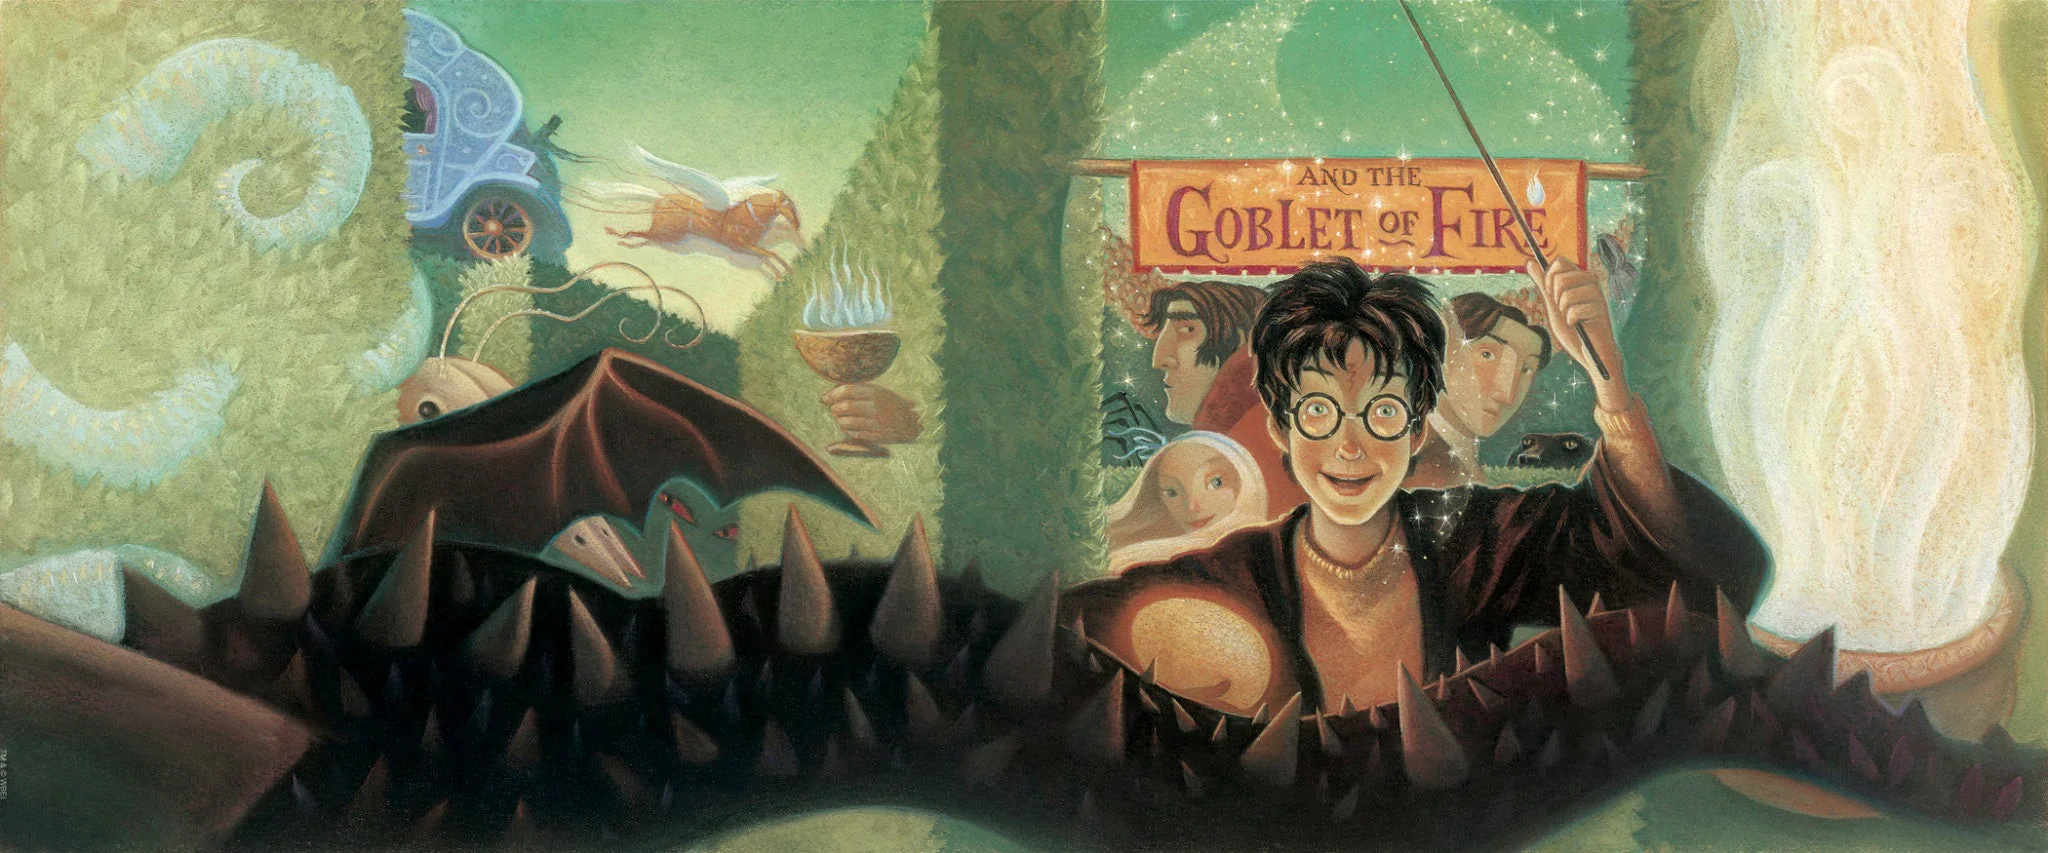 30 Immortal Quotes from Harry Potter and the Goblet of Fire